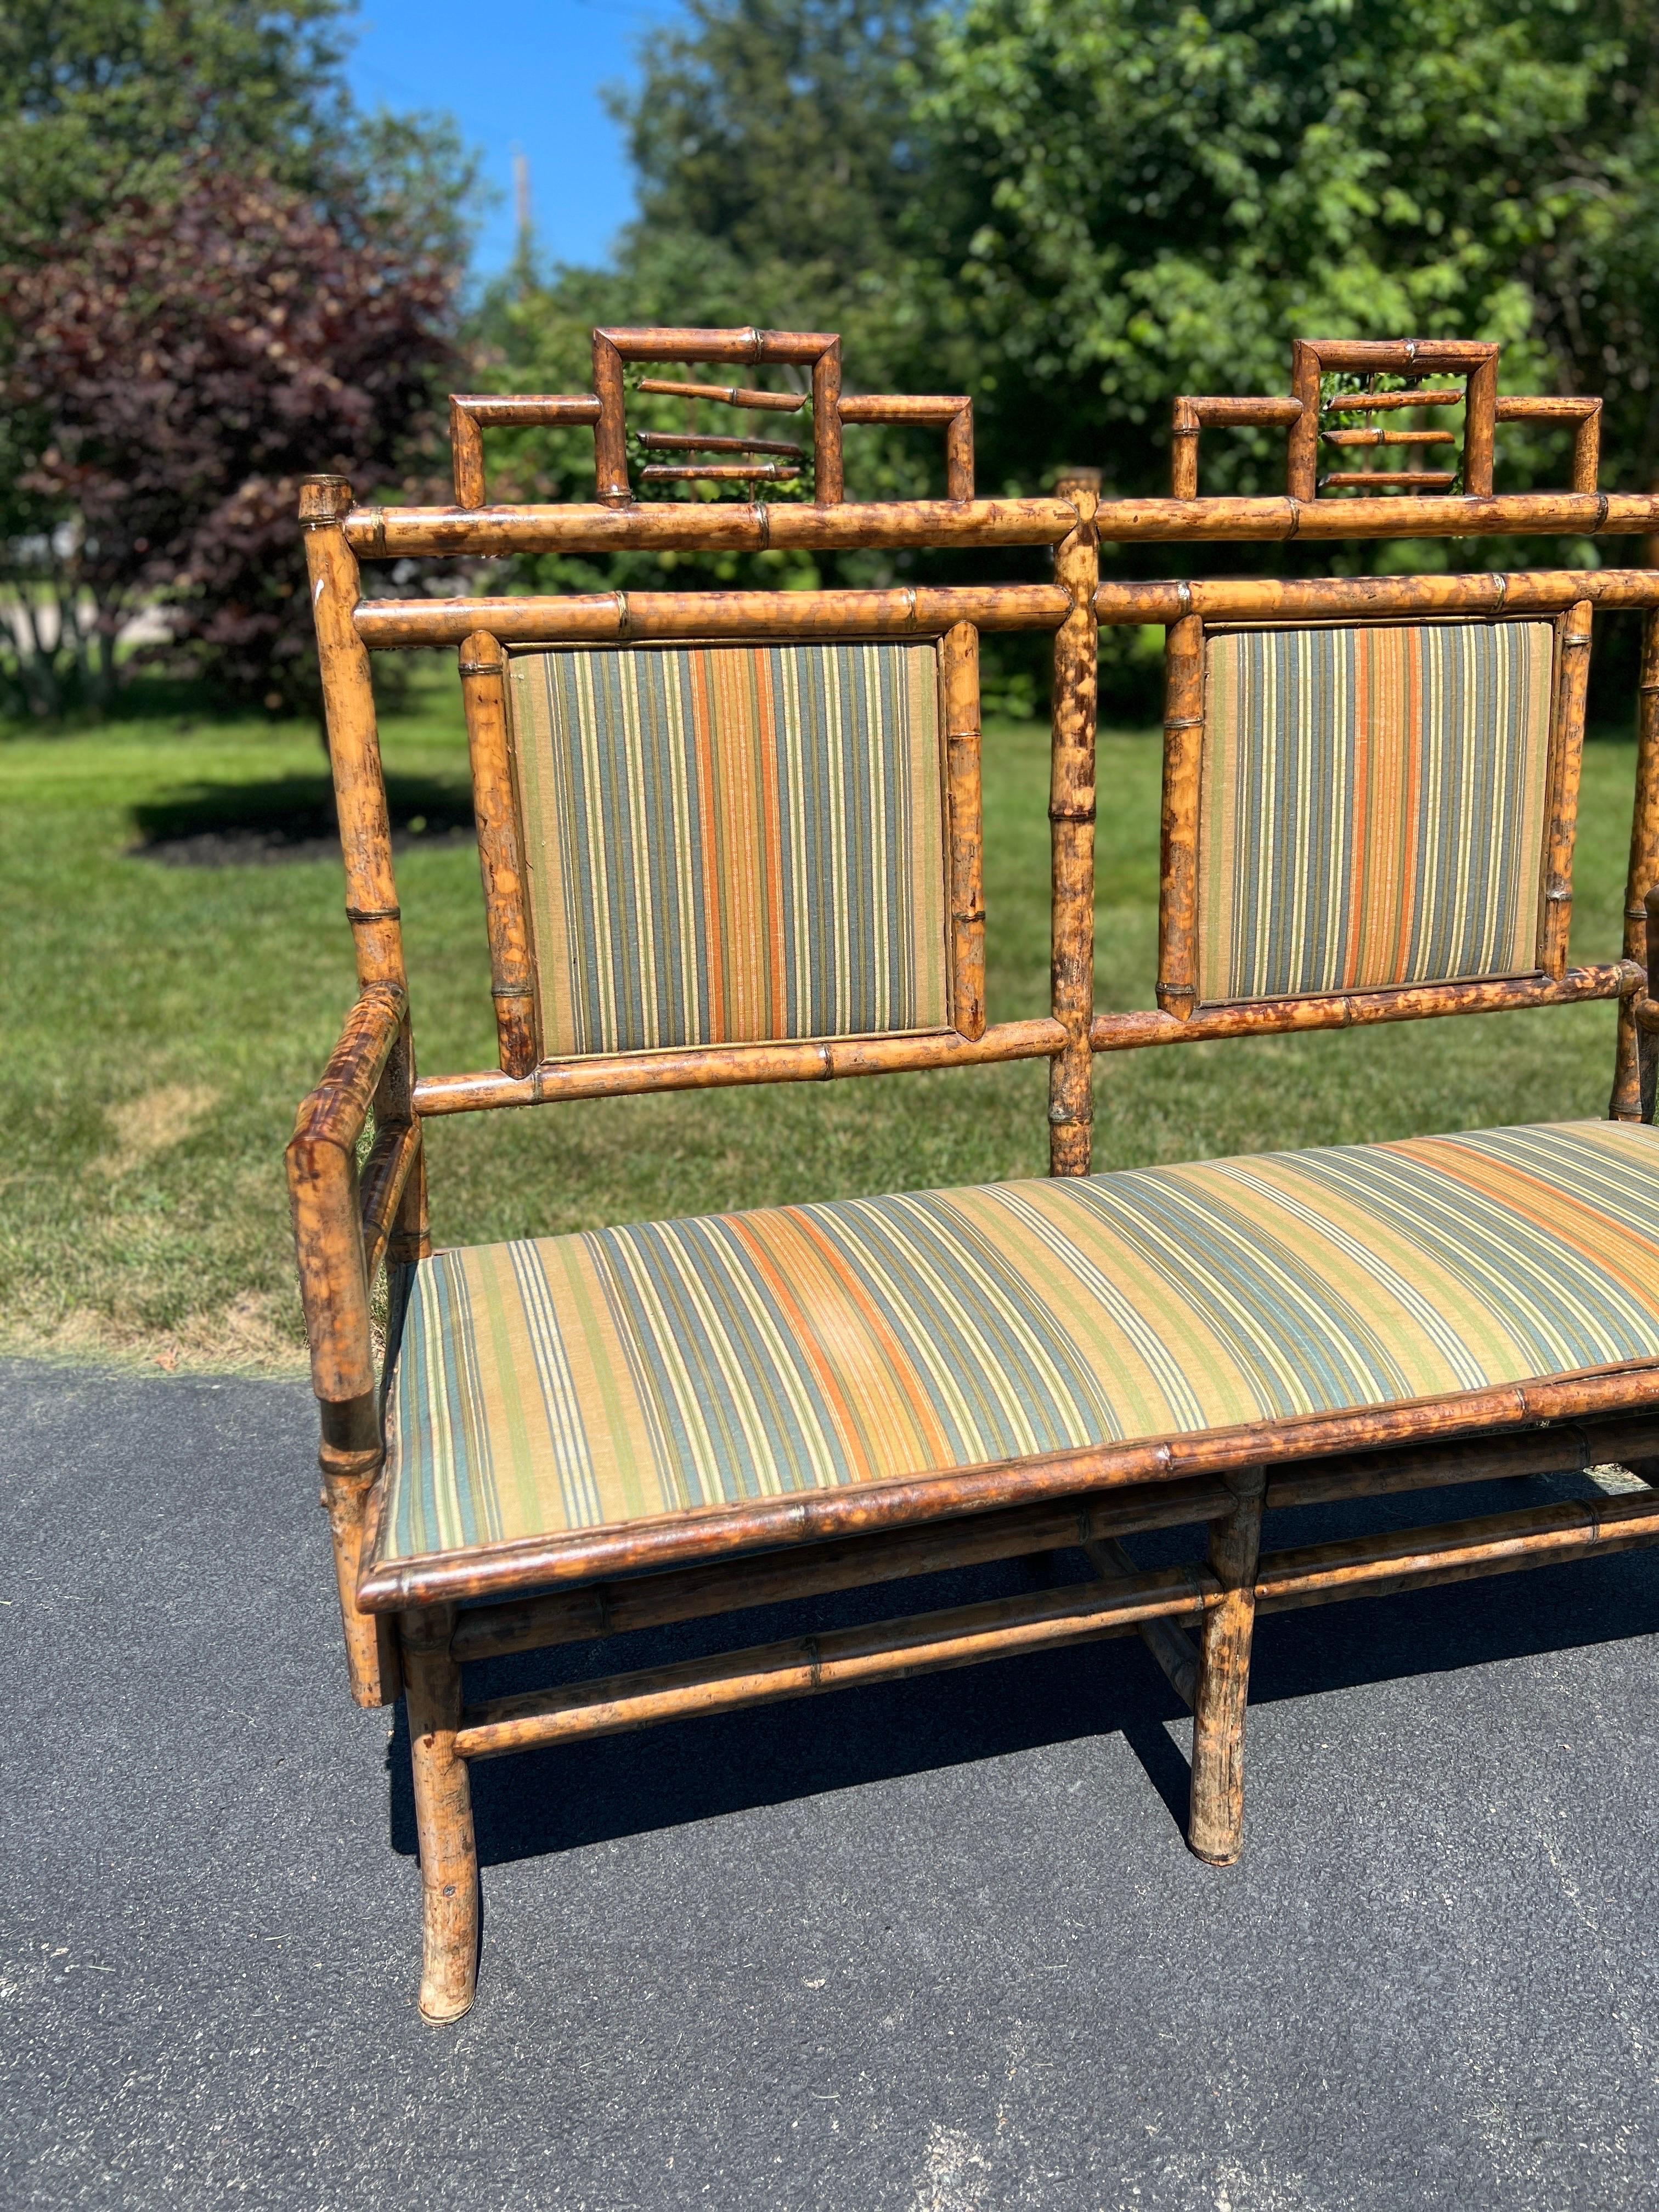 English, circa 1920. An antique English Aesthetic movement bamboo bench for two. The bench is upholstered with a traditional fabric that brings stunning lines to accent the beautiful bamboo construction on the bench. The head crest has a chinoiserie